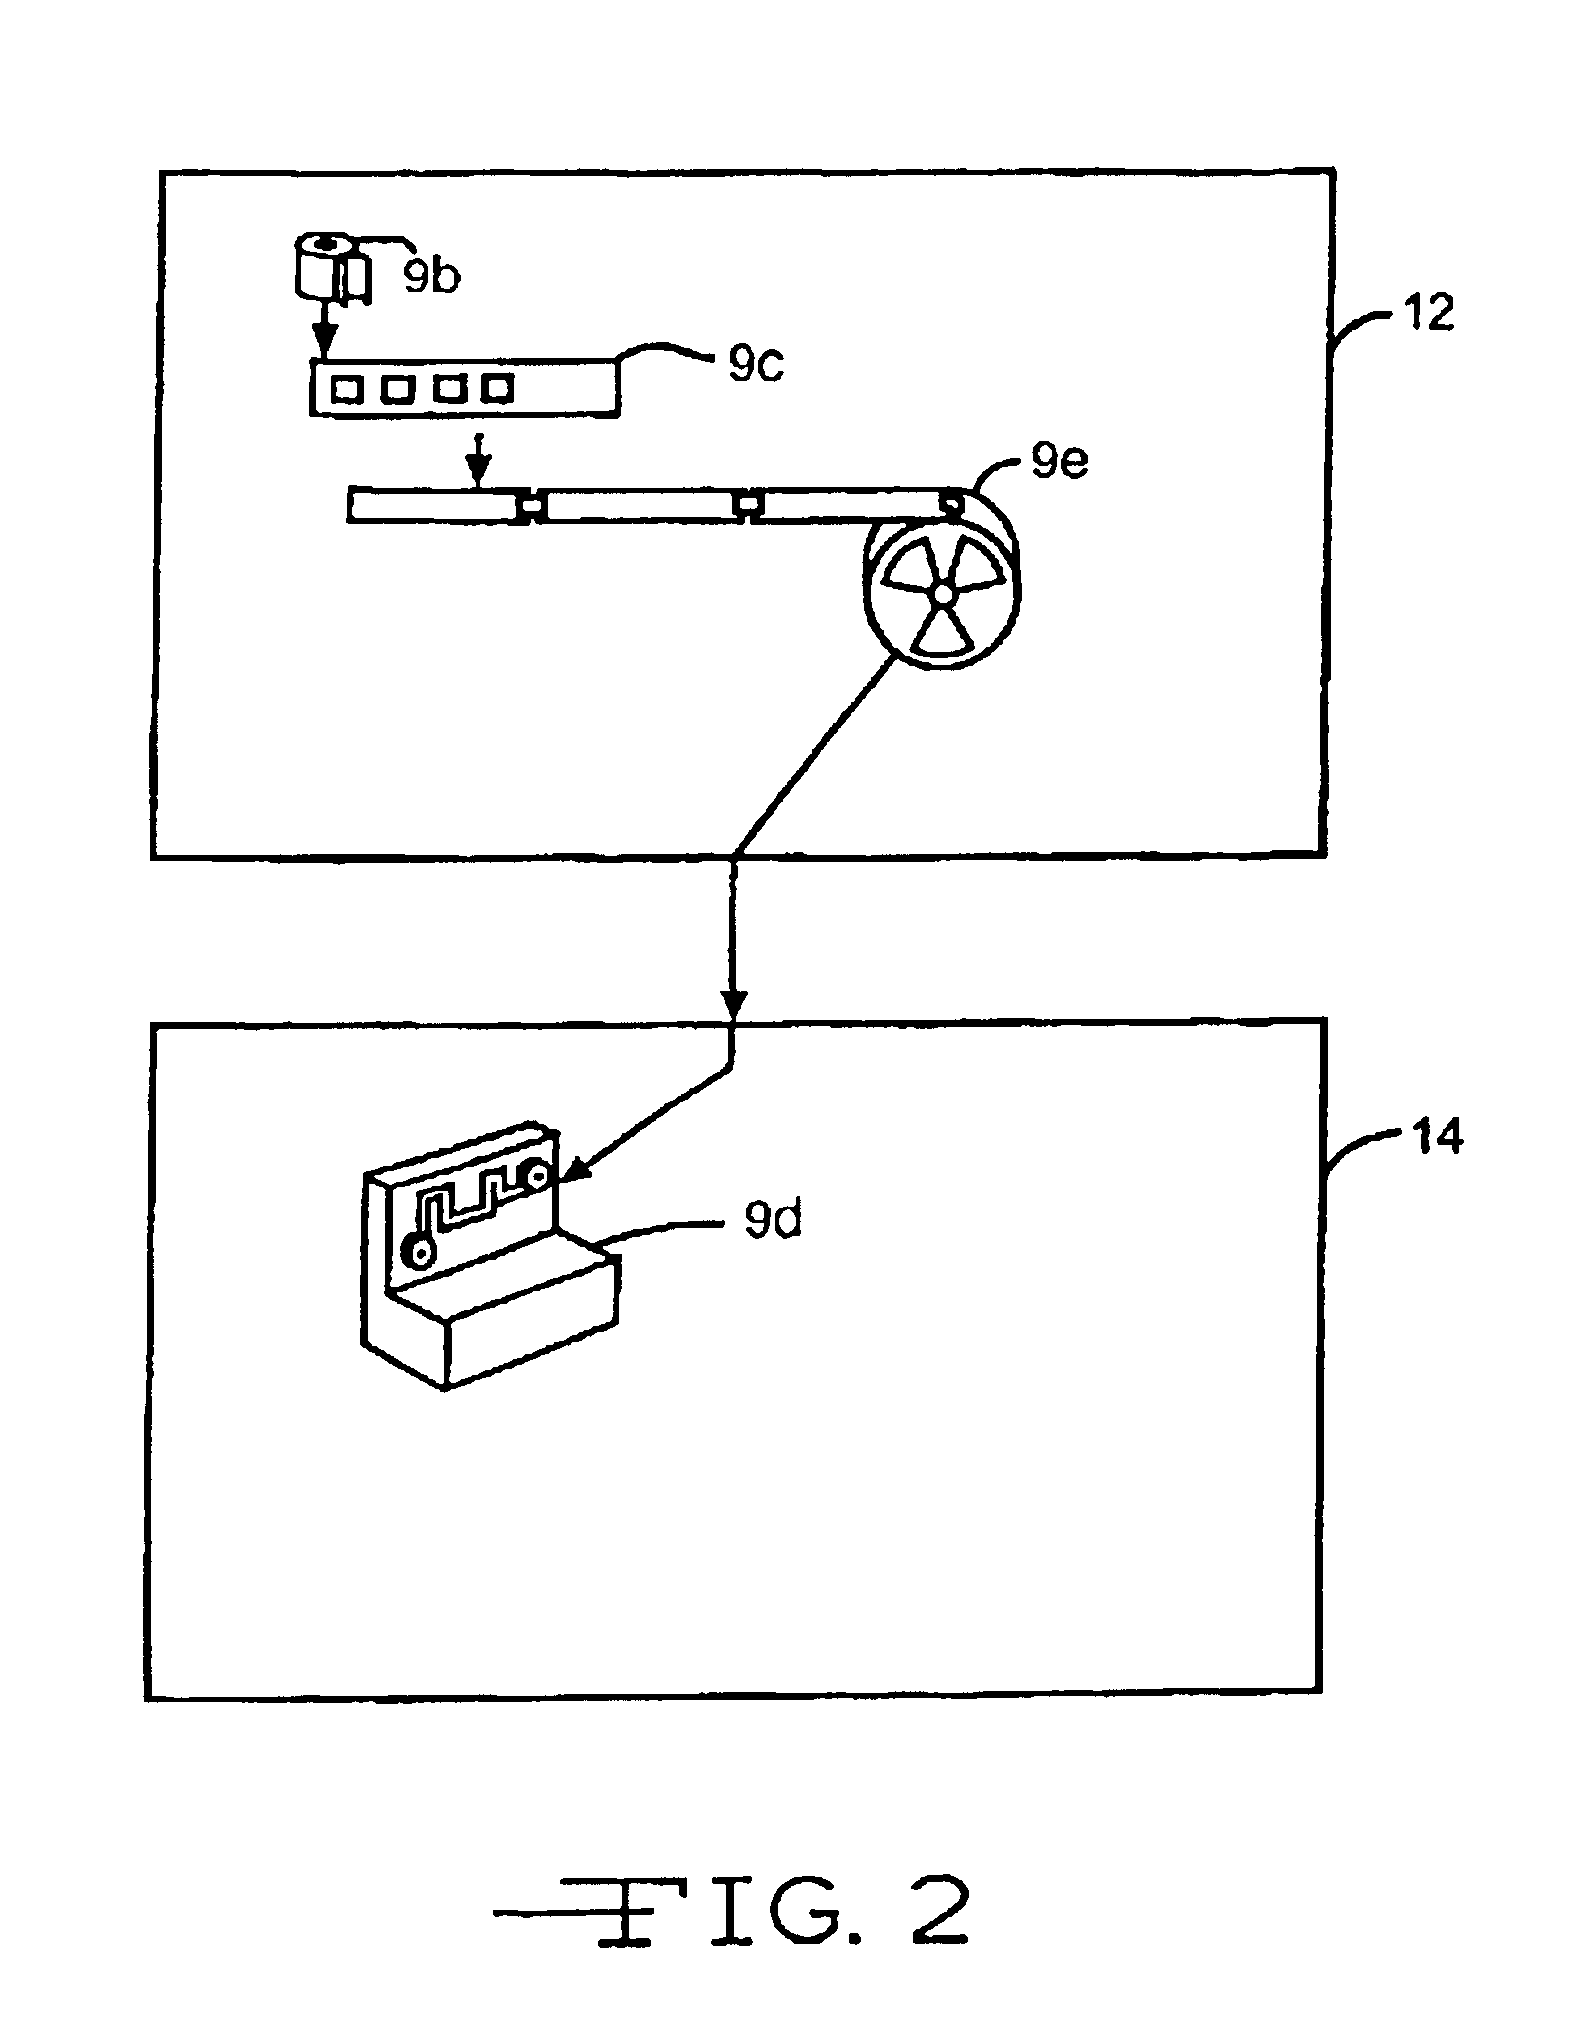 Method of processing a roll of exposed photographic film containing photographic images into corresponding digital images and then distributing visual prints produced from the digital images